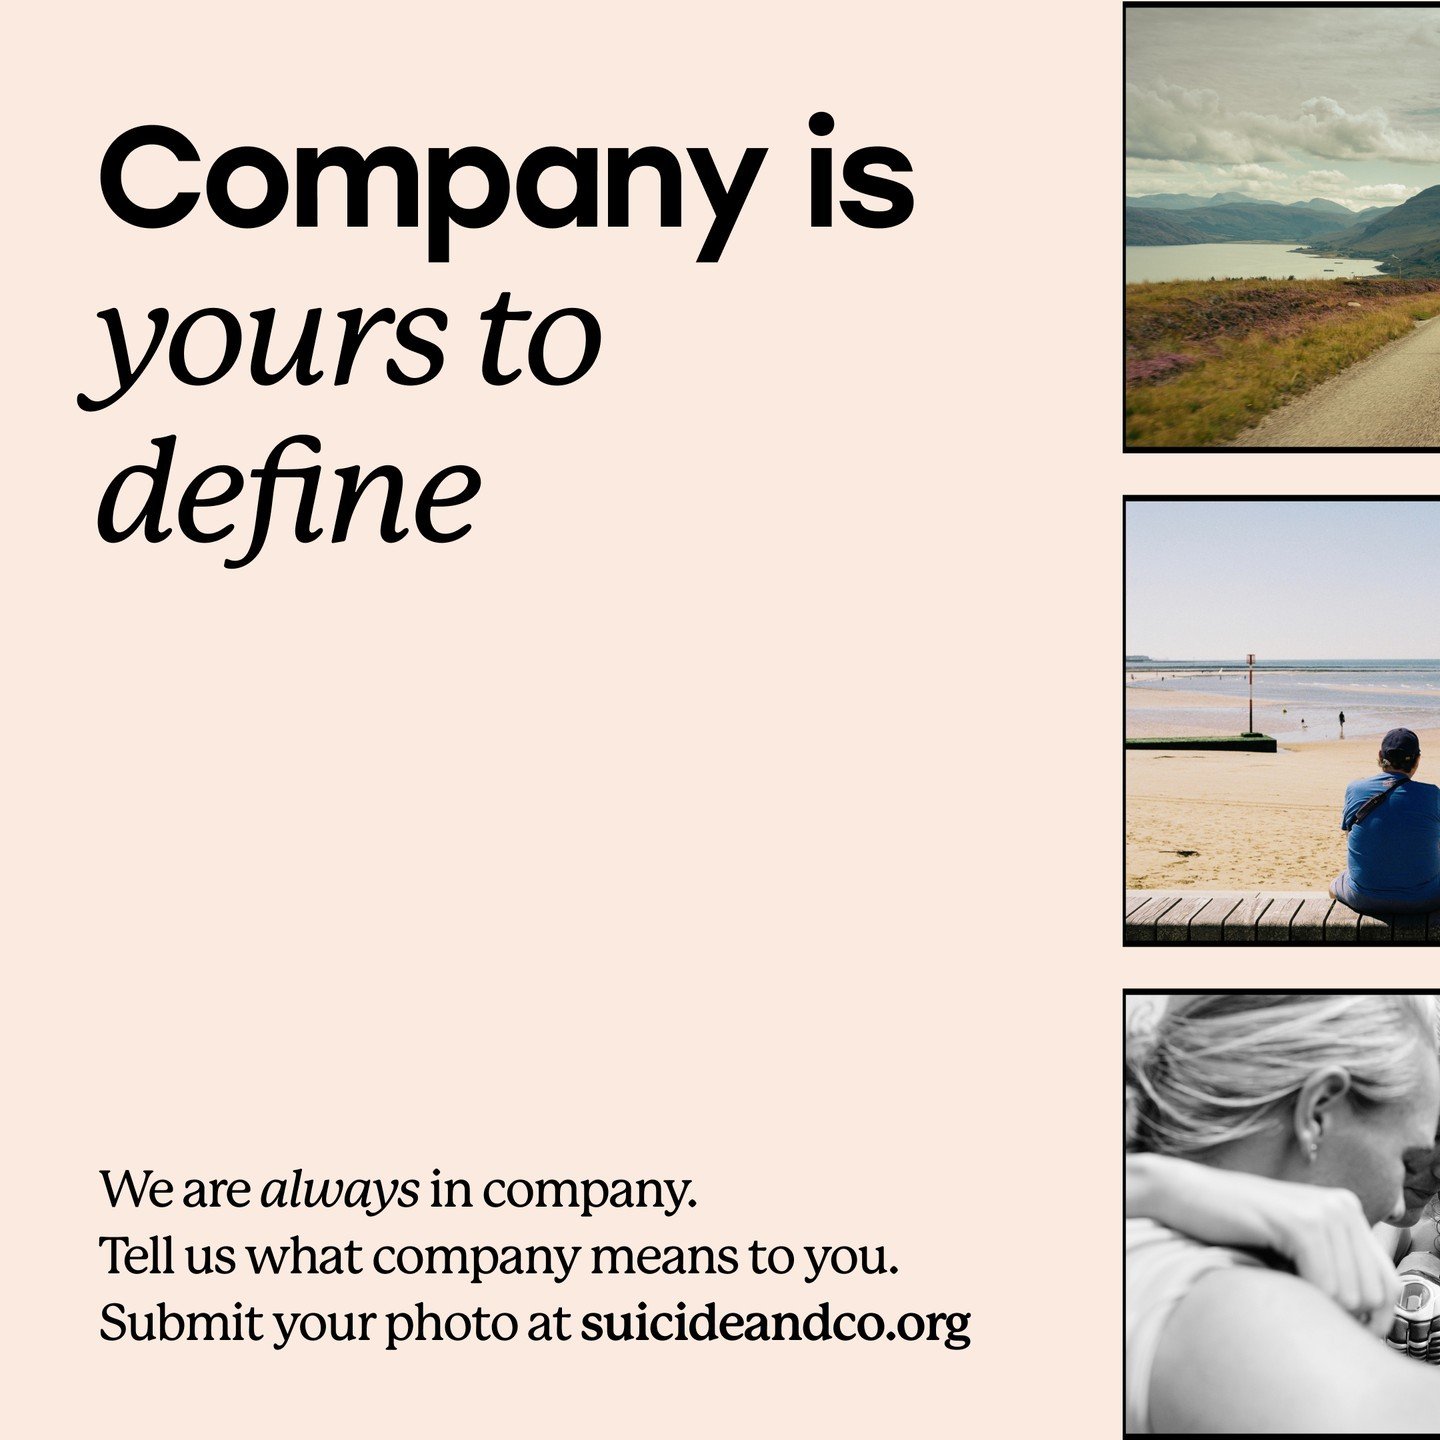 You can now check out the Always In Company area of our website to see the gallery of photos submitted by our community showing what company looks like to them. 

We have learnt from this project that company is yours to define. We hope this collecti